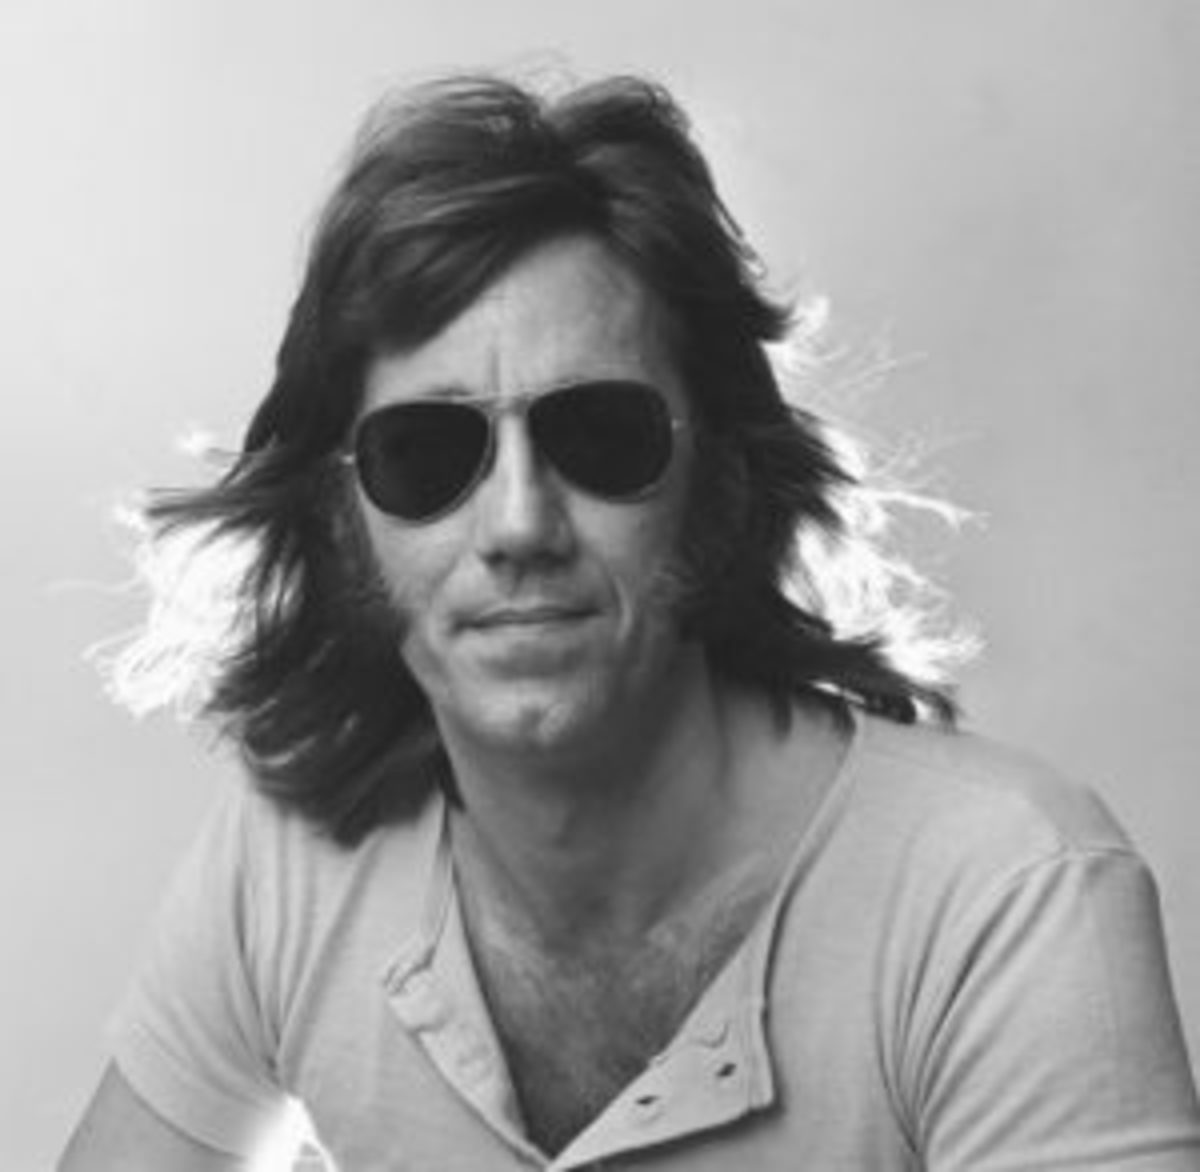  POST-DOORS:A photograph of Ray Manzarek in the 1970s by James Fortune.